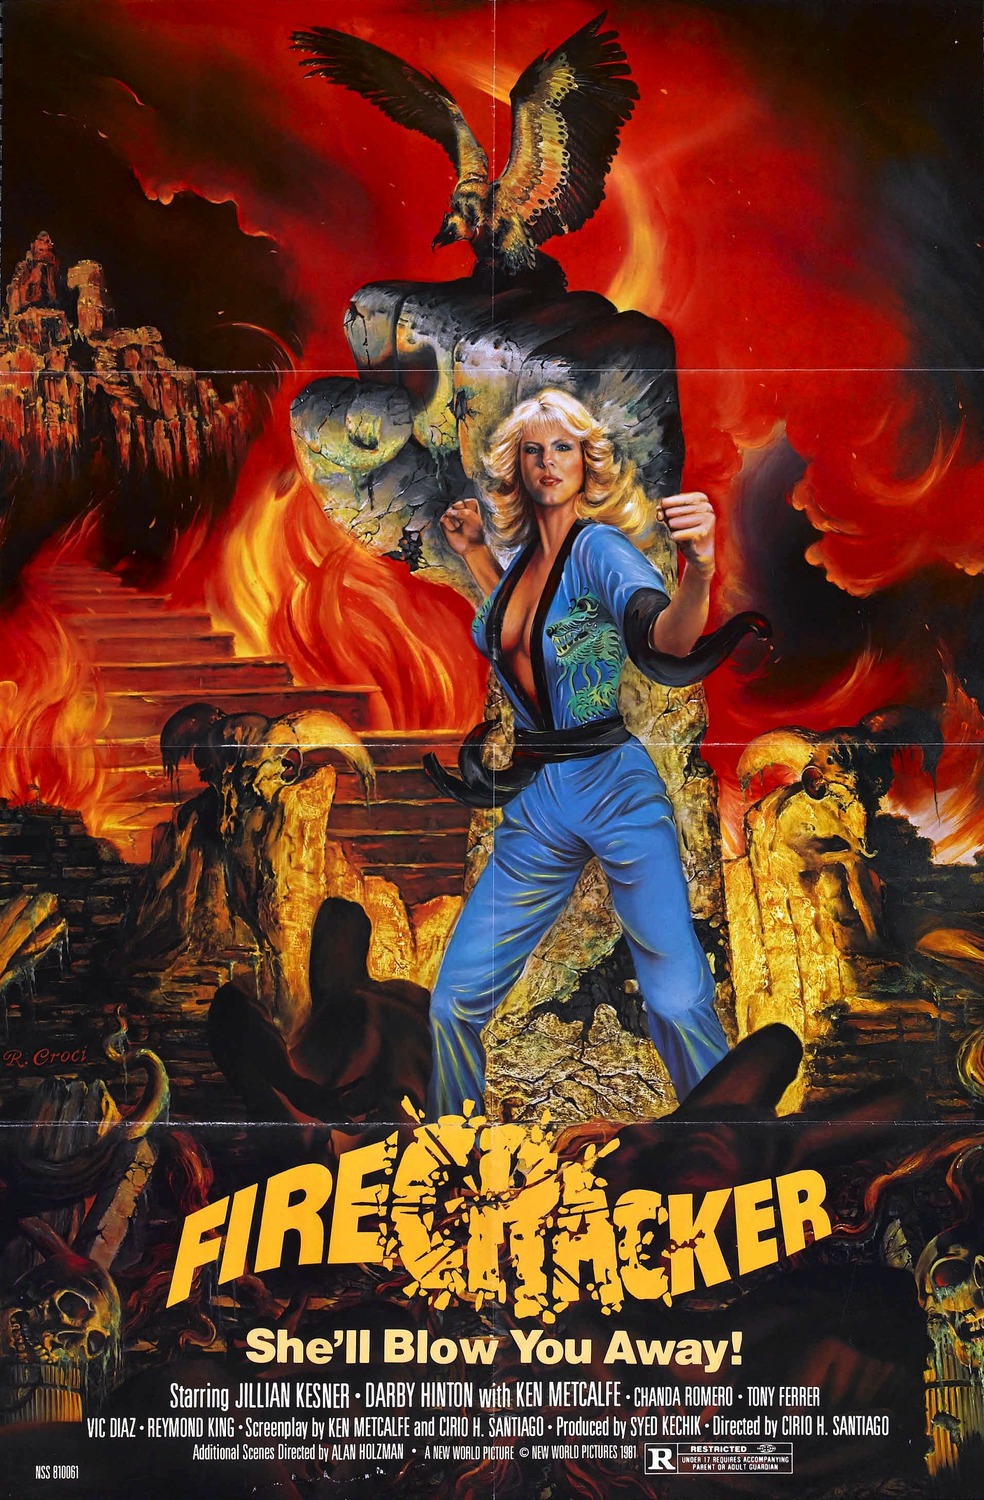 Extra Large Movie Poster Image for Firecracker 